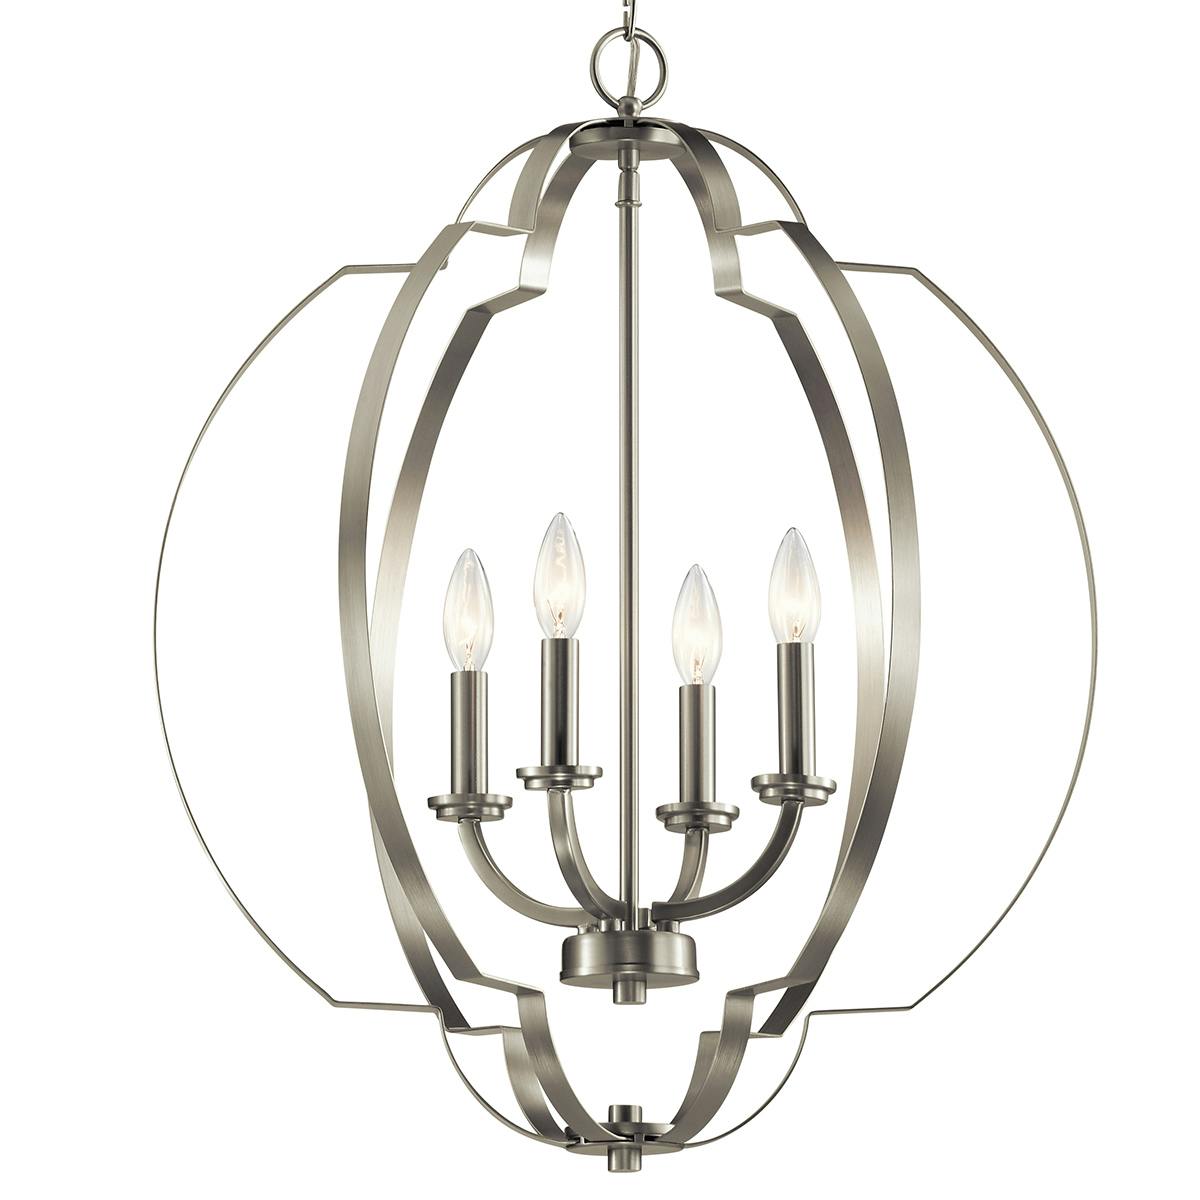 Close up view of the Voleta 26.25" Foyer Pendant Nickel on a white background